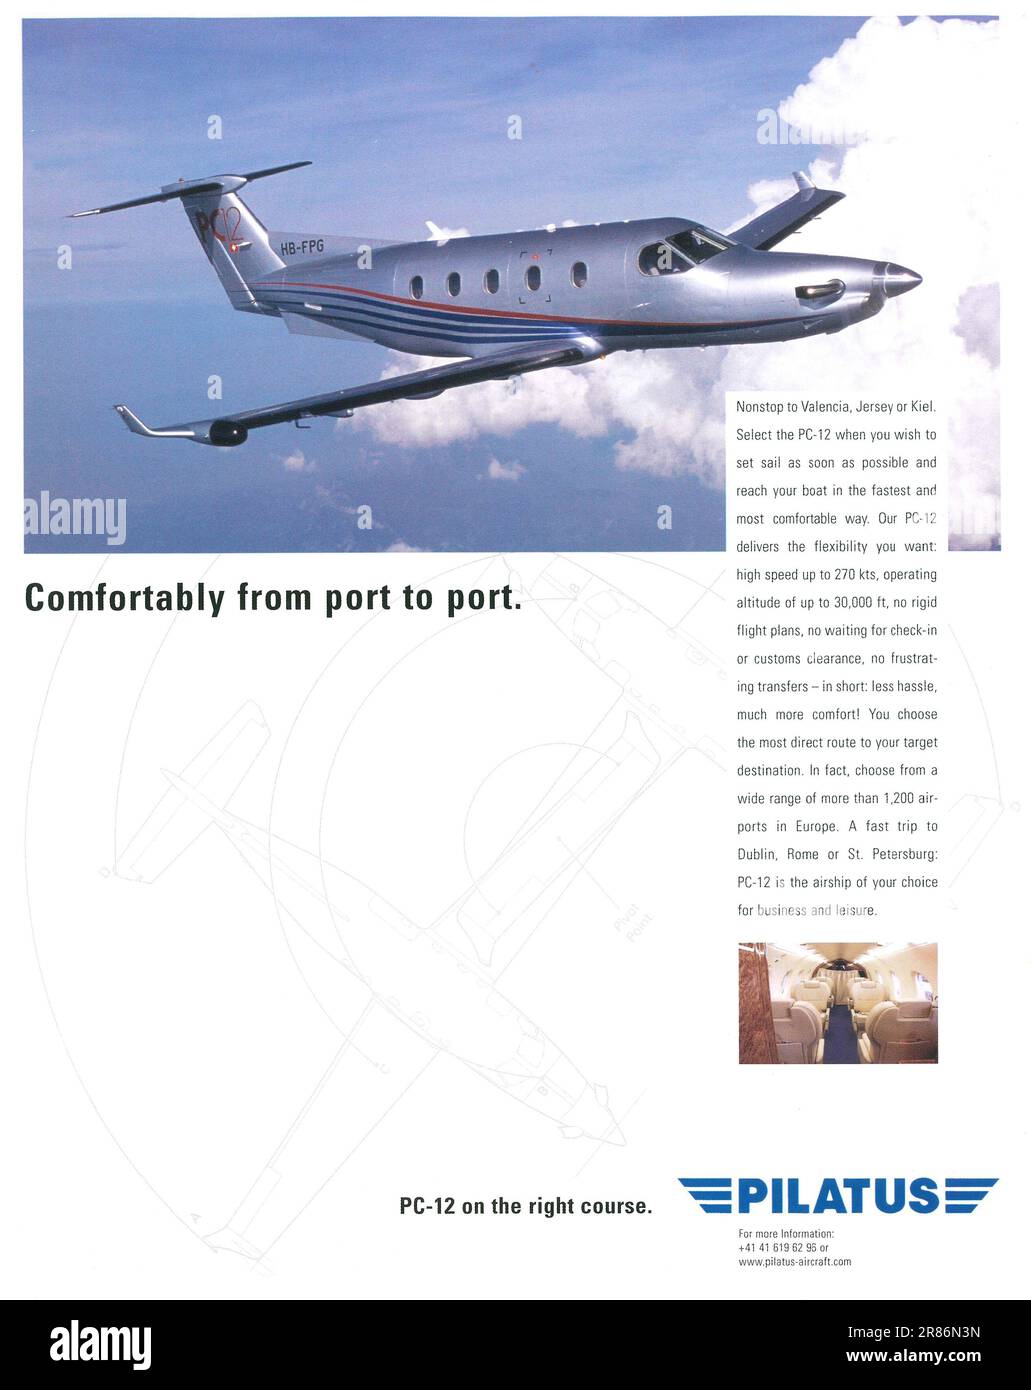 Pilatus PC-12 Cargo aircraft advert in a Collections magazine 2014 Stock Photo